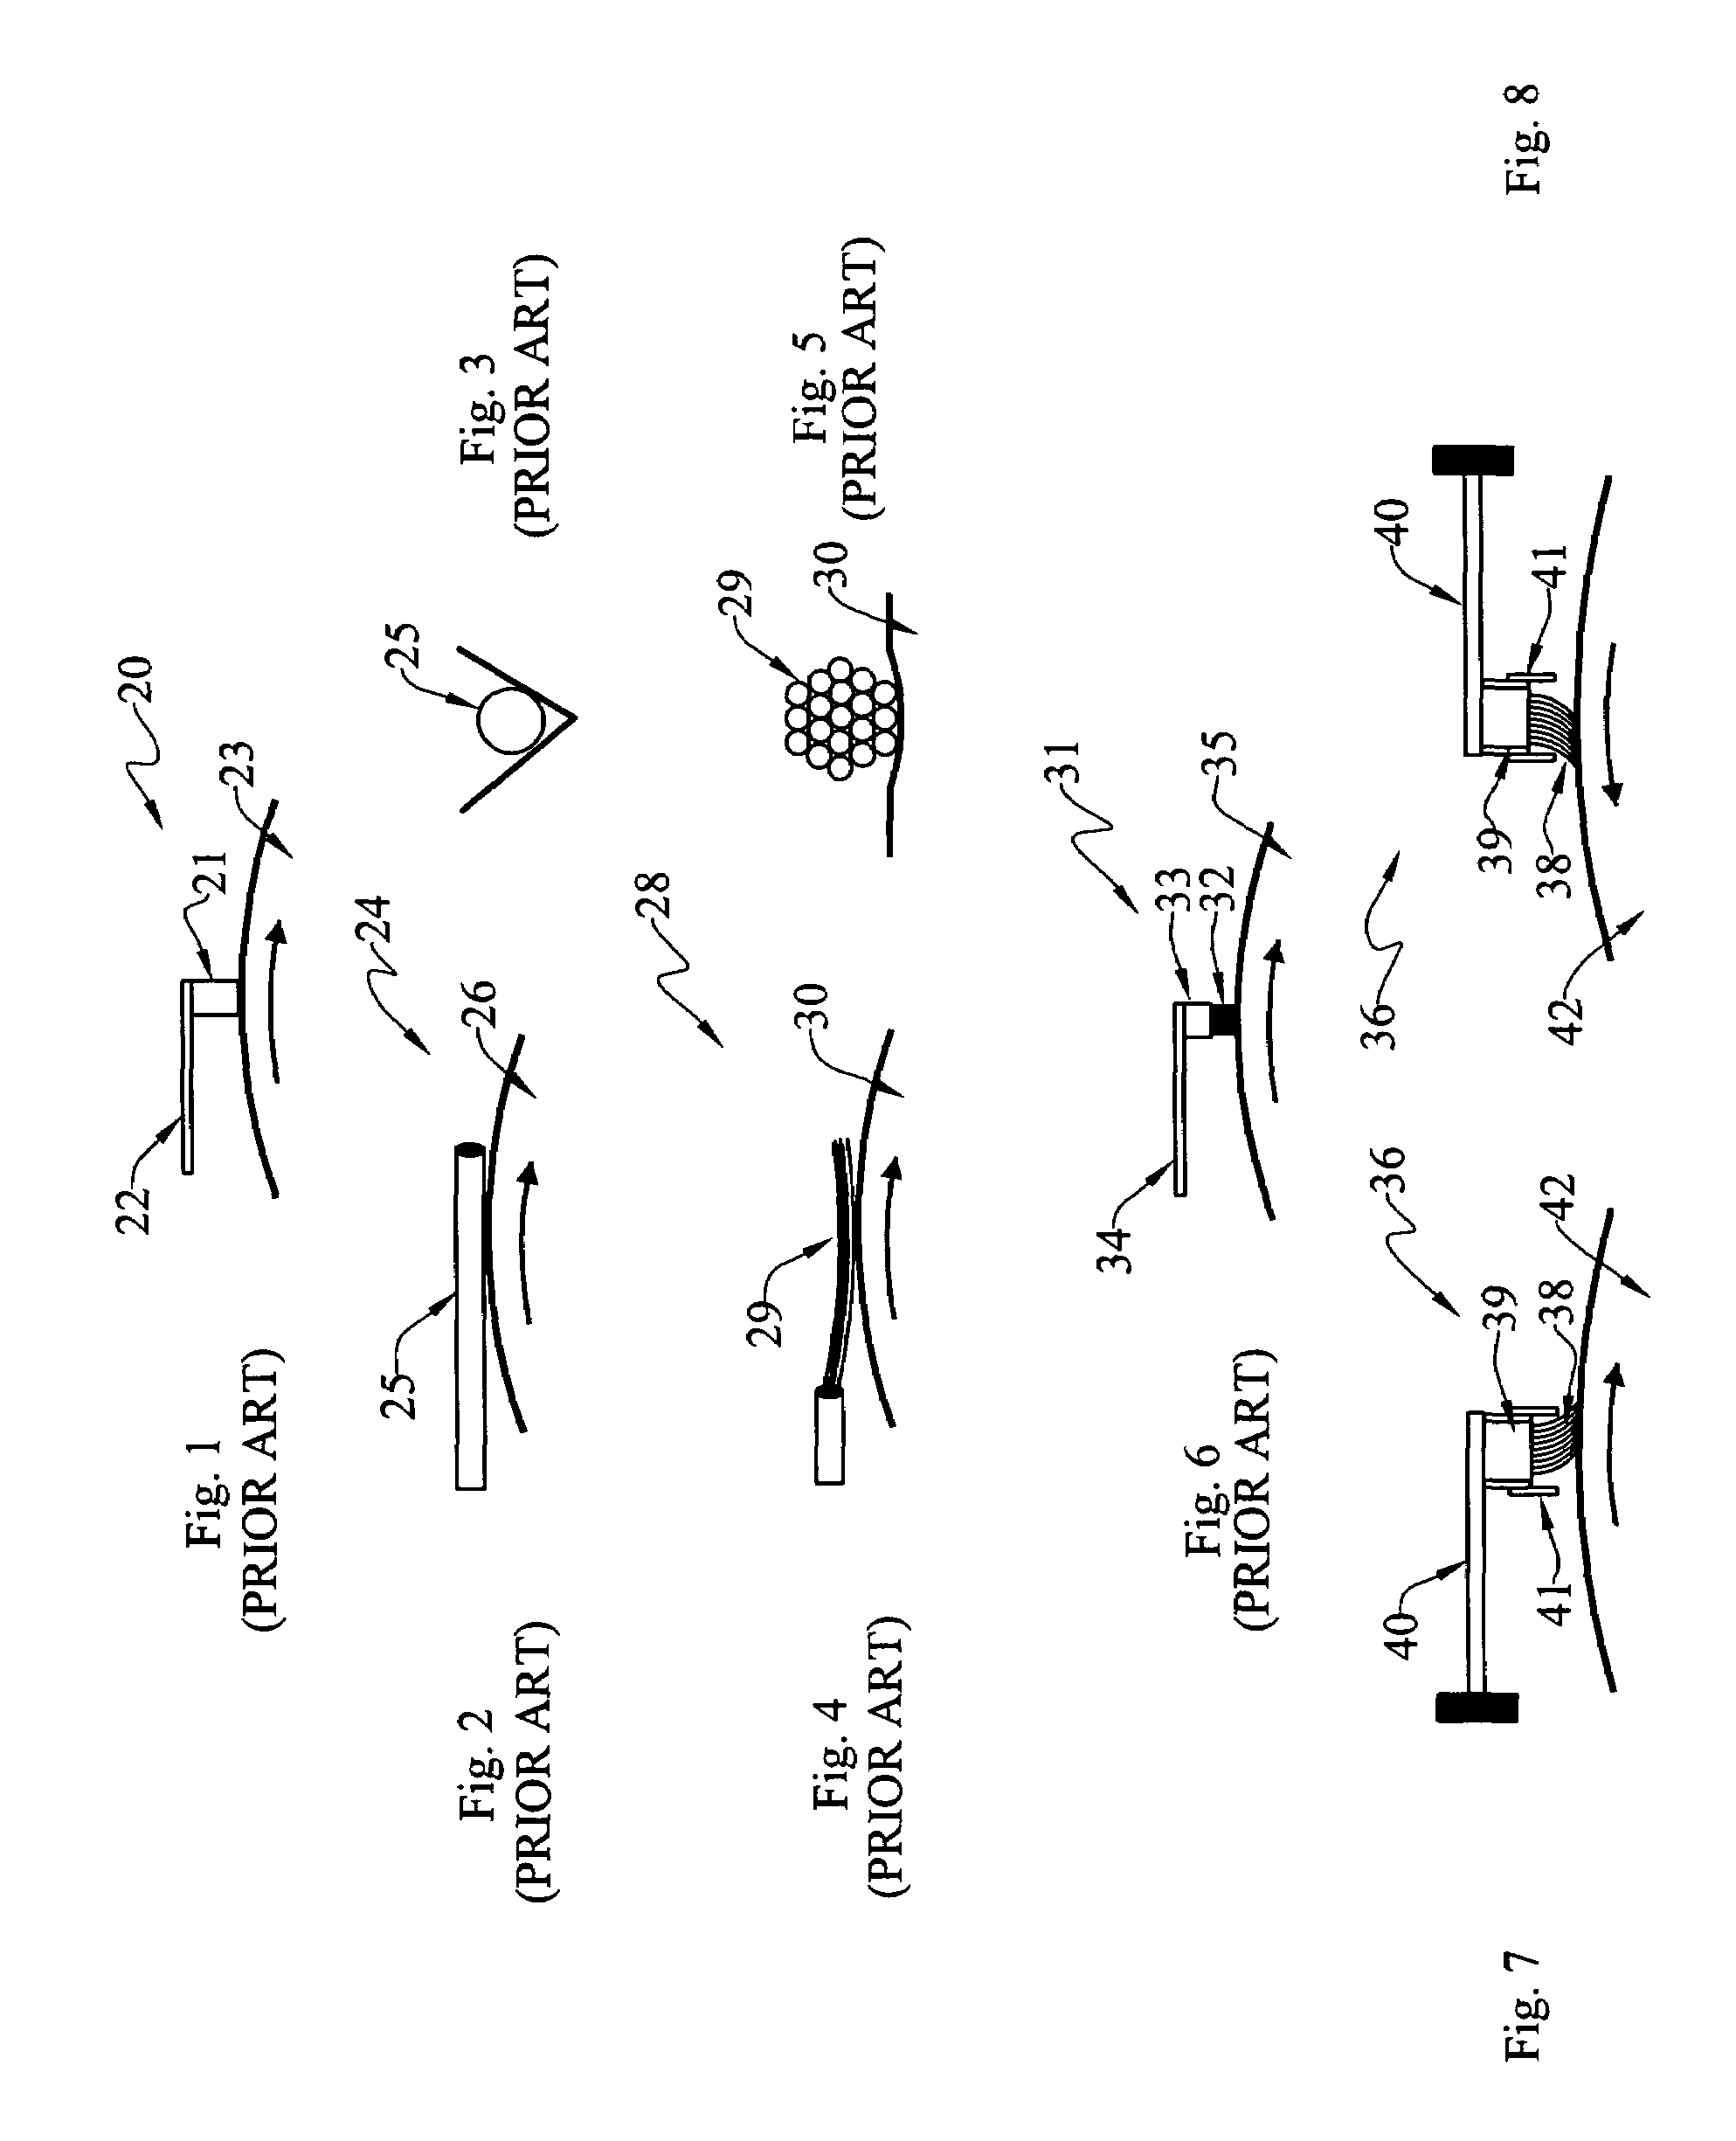 Electrical contact technology and methodology for the manufacture of large-diameter electrical slip rings